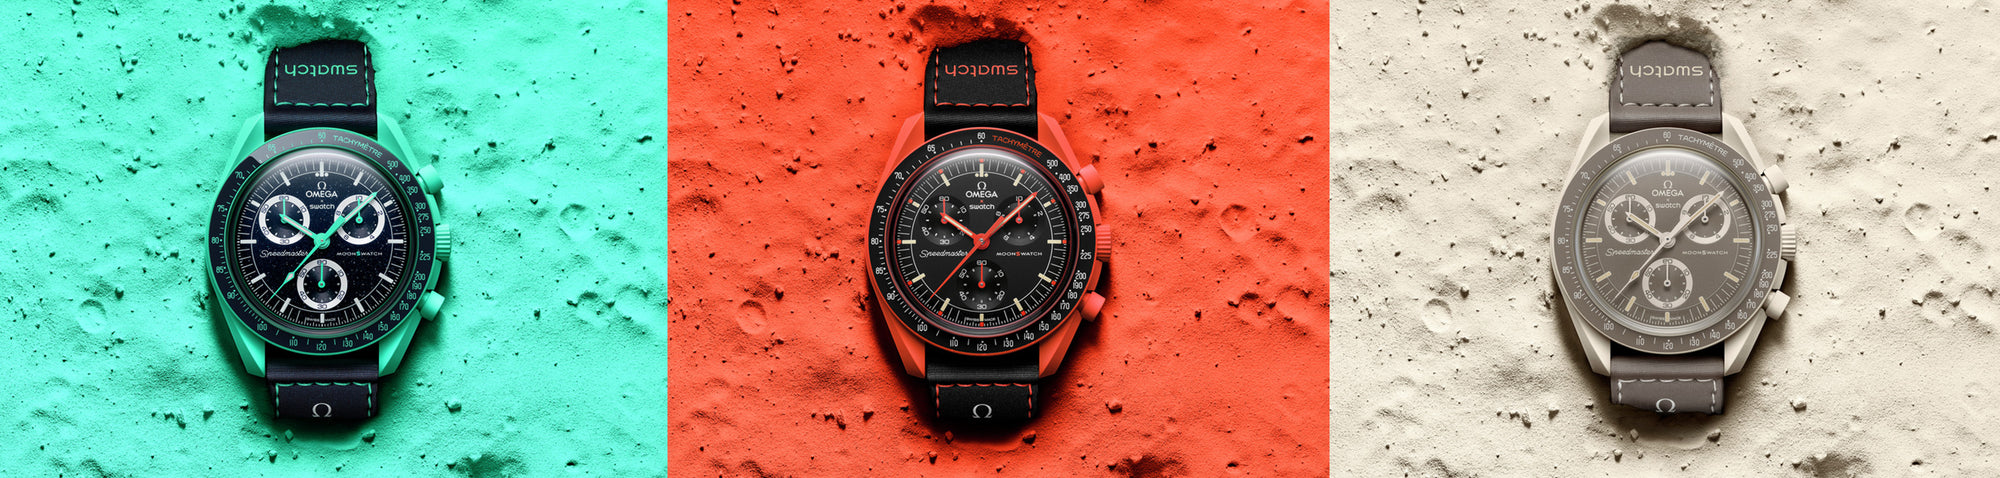 The New Omega X Swatch MoonSwatch Mission On Earth Launches: Here’s What You Need To Know